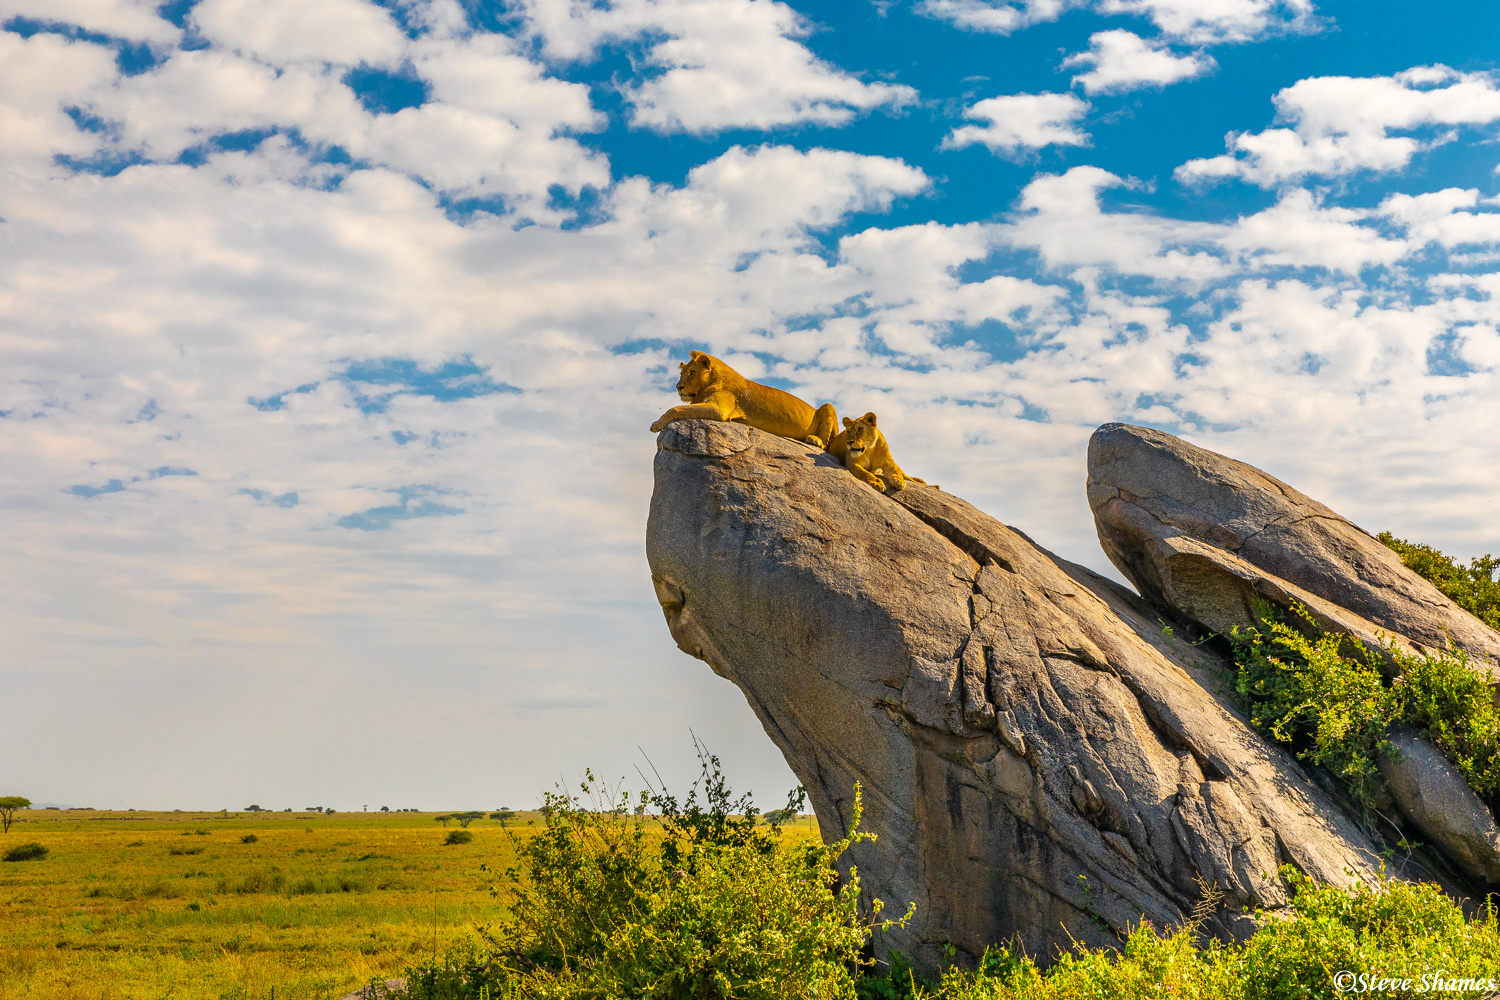 Lions on a rocky perch scanning the landscape.